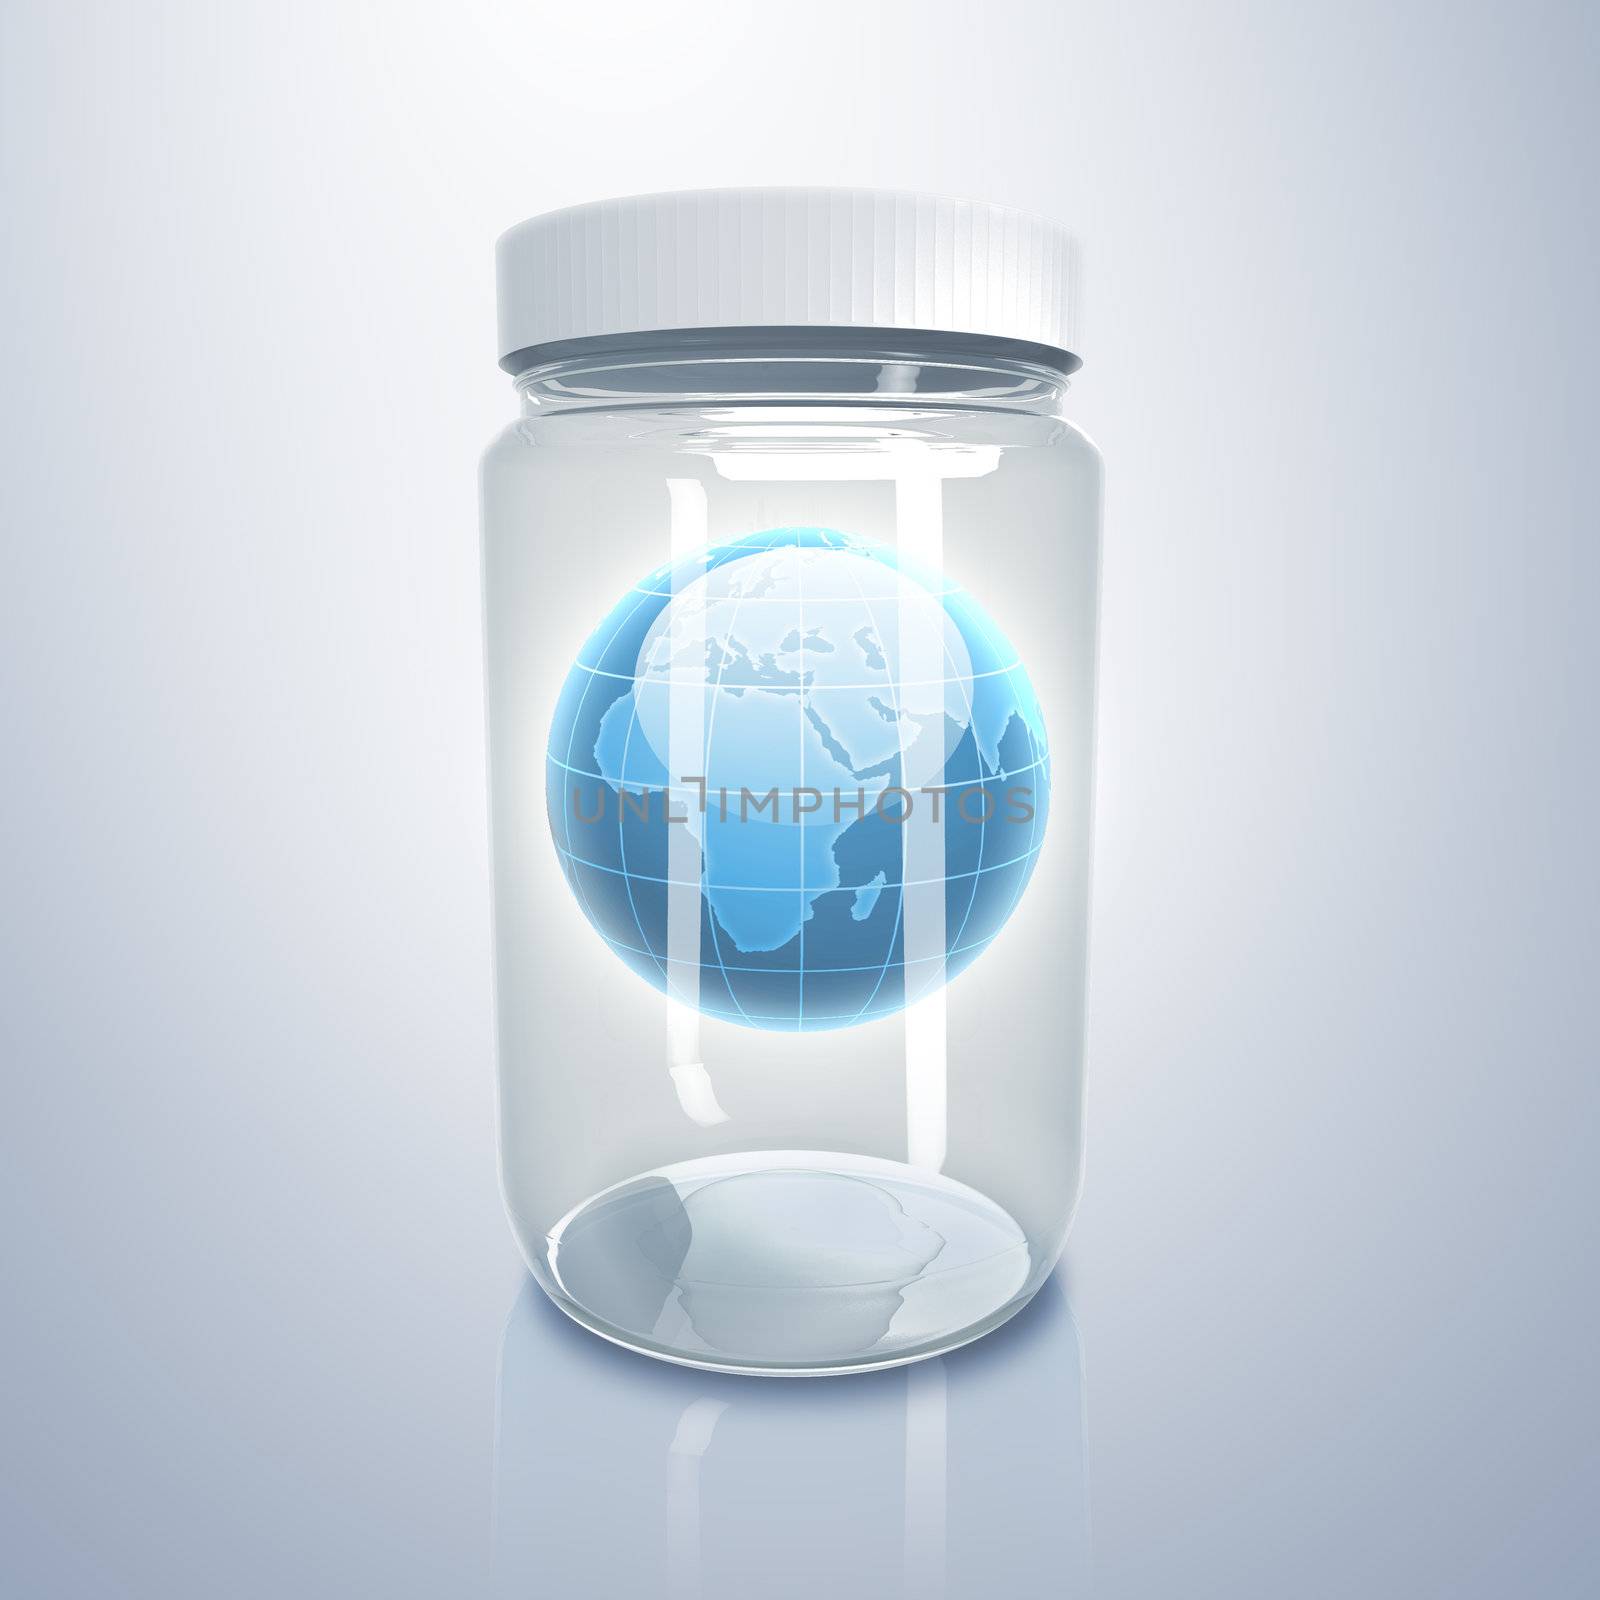 Image of our planet earth inside a glass jar